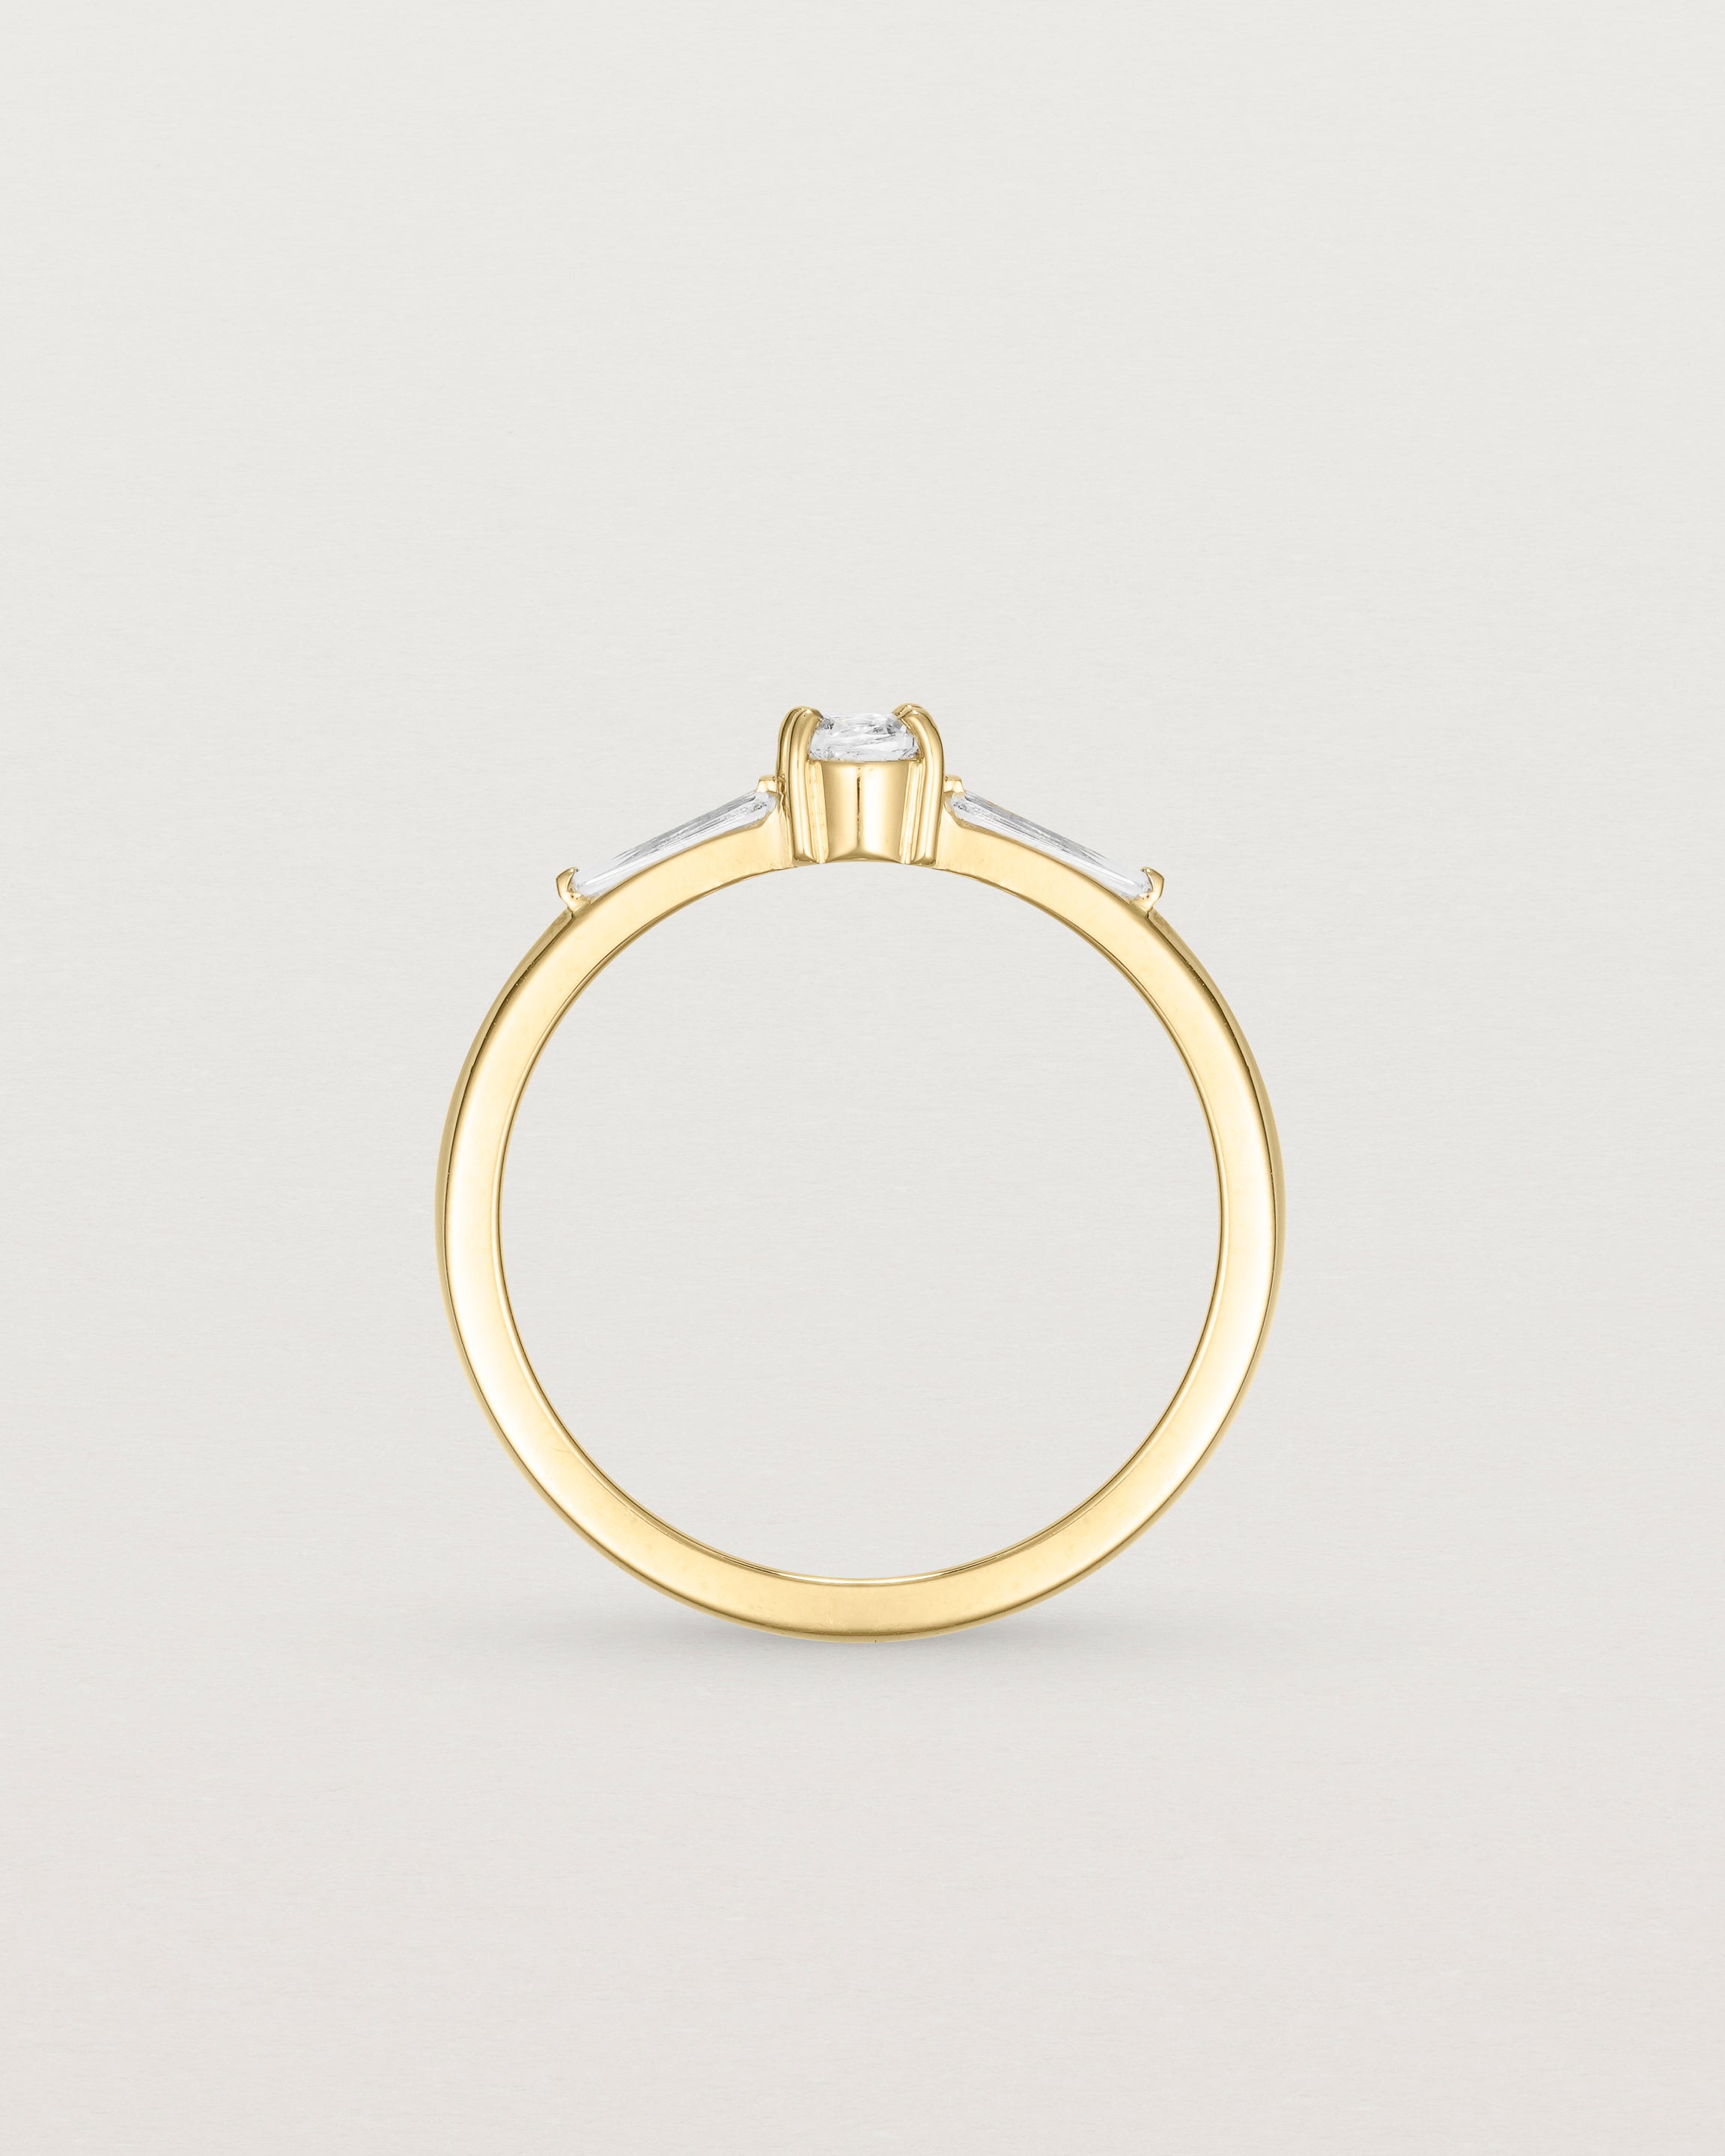 Standing view of the Ives | Trio Ring | Diamonds.